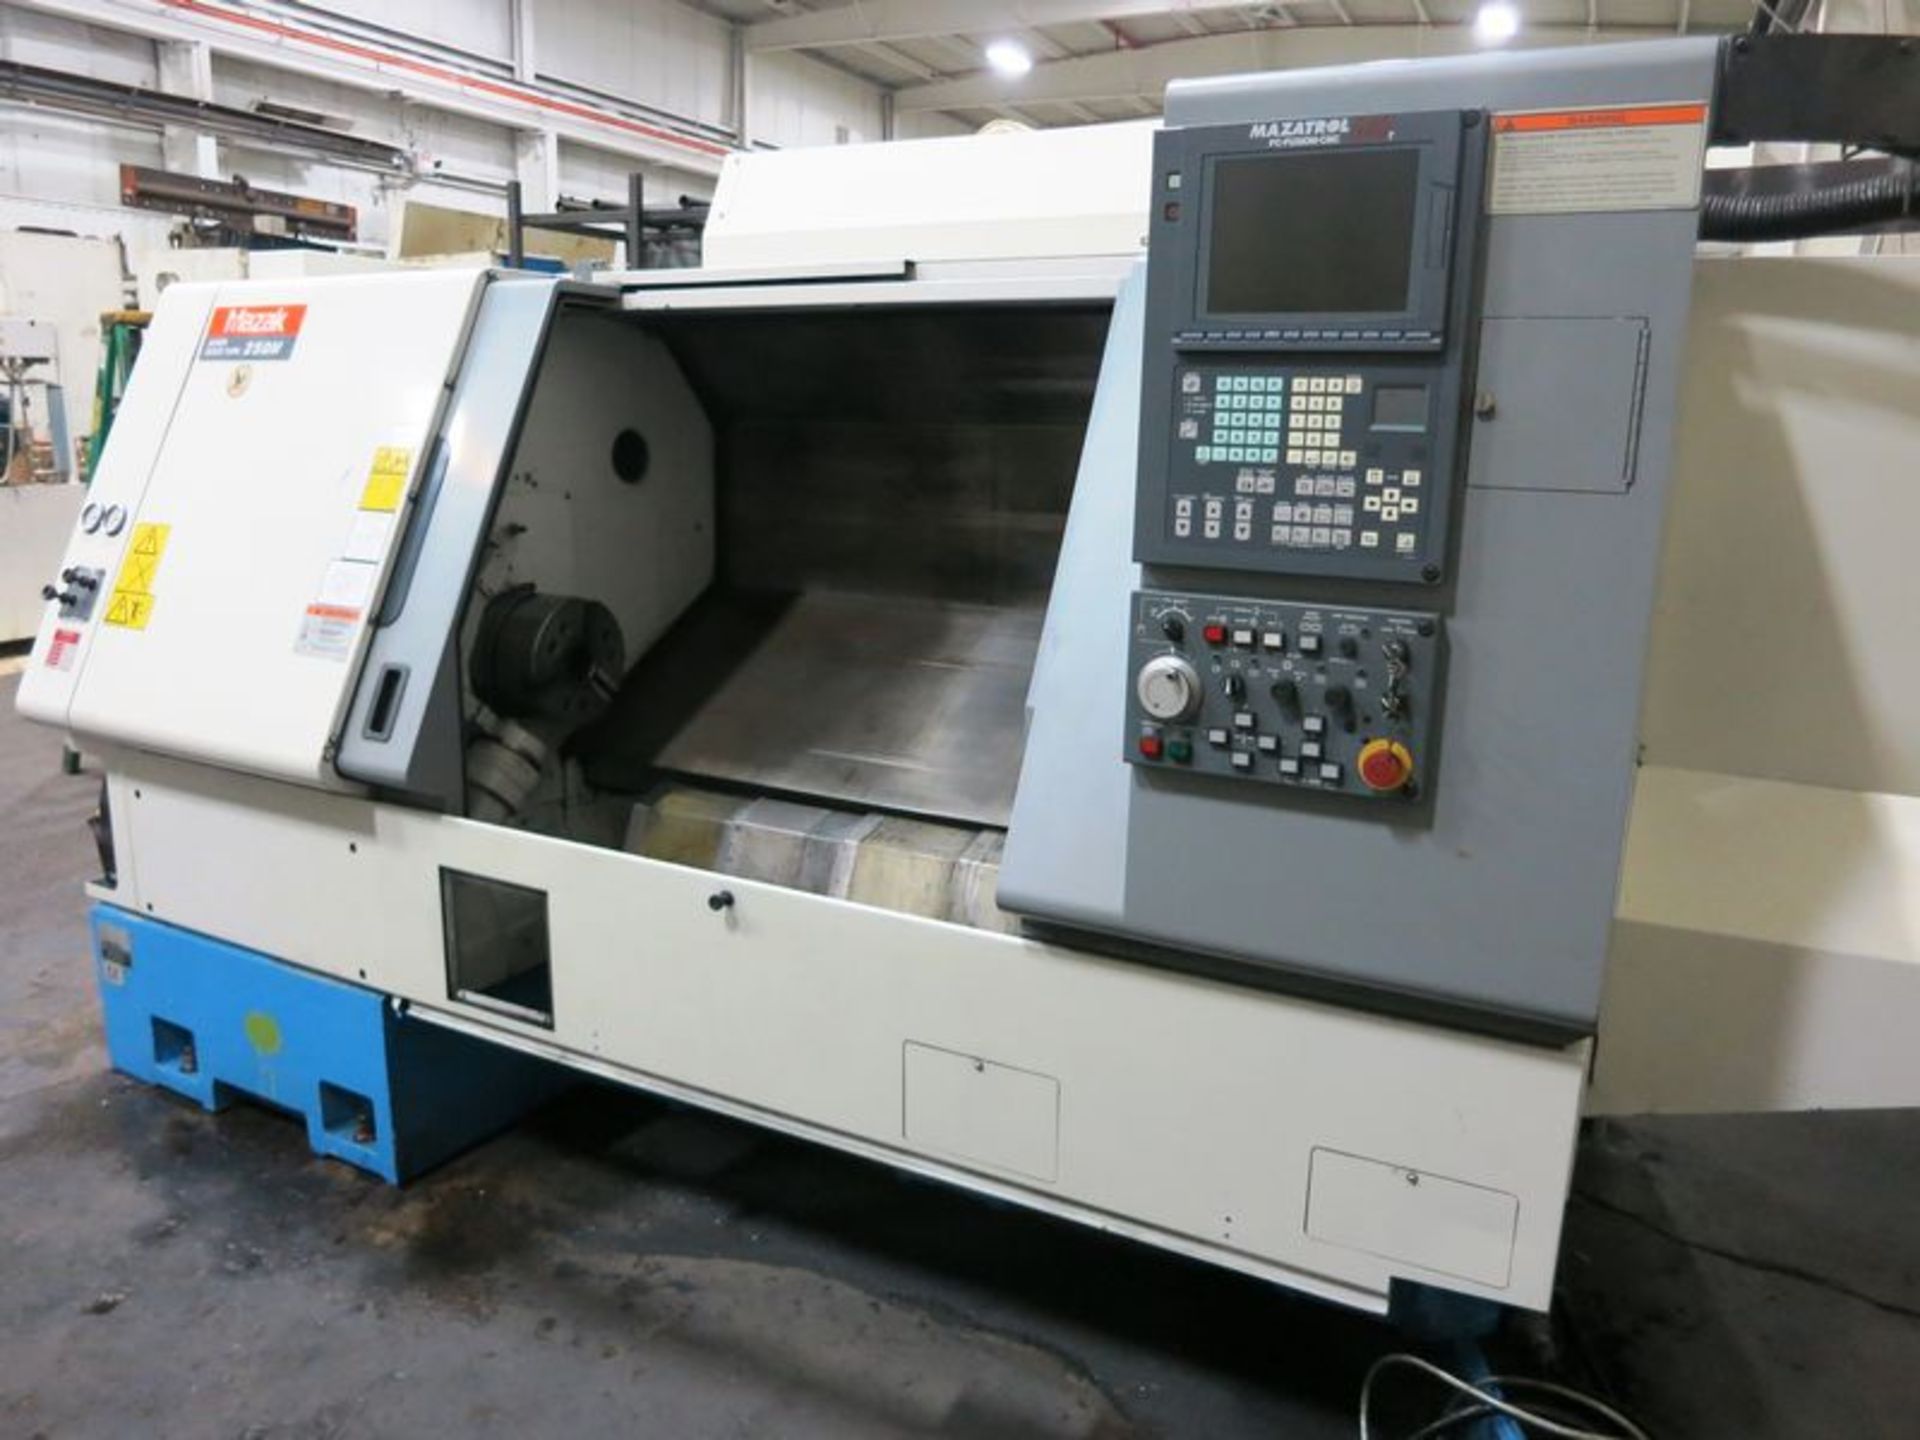 11.81"X39.6"MAZAK SQT 250M CNC 3-AXIS TURNING CENTER LATHE WITH LIVE TOOLING, S/N 165223, NEW 2003 - Image 11 of 16